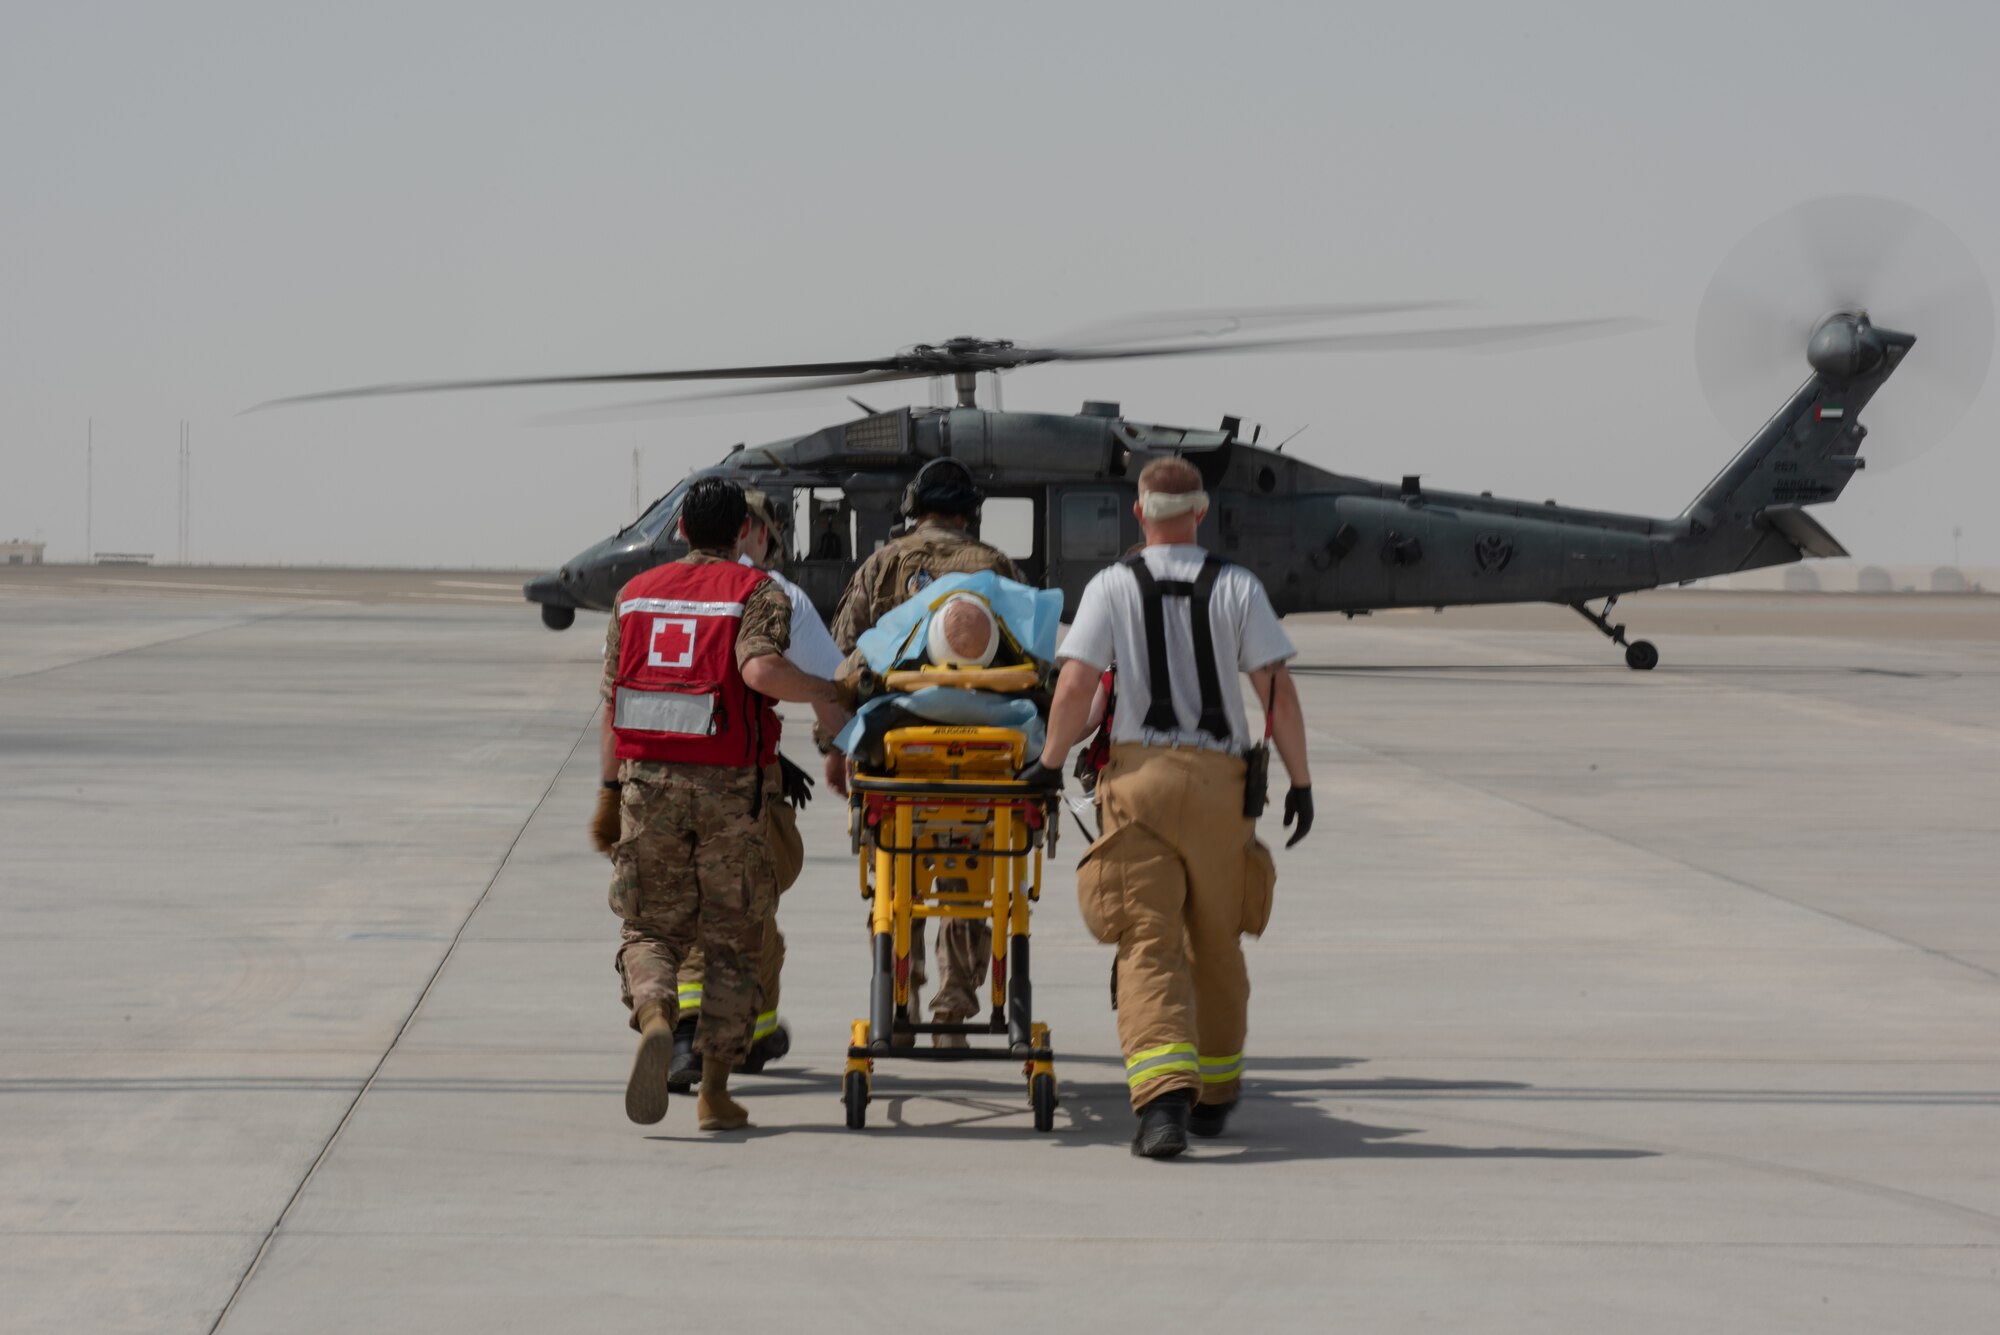 380th Air Expeditionary Wing firefighters and medics move a simulated patient to an Emirati UH-60 Black Hawk during a large first responder exercise Sept. 24, 2019, at Al Dhafra Air Base, United Arab Emirates. The exercise helped foster partnership with the United Arab Emirates Air Force Joint Aviation Command to practice an aeromedical evacuation scenario via helicopter. (U.S. Air Force photo by Staff Sgt. Chris Thornbury)